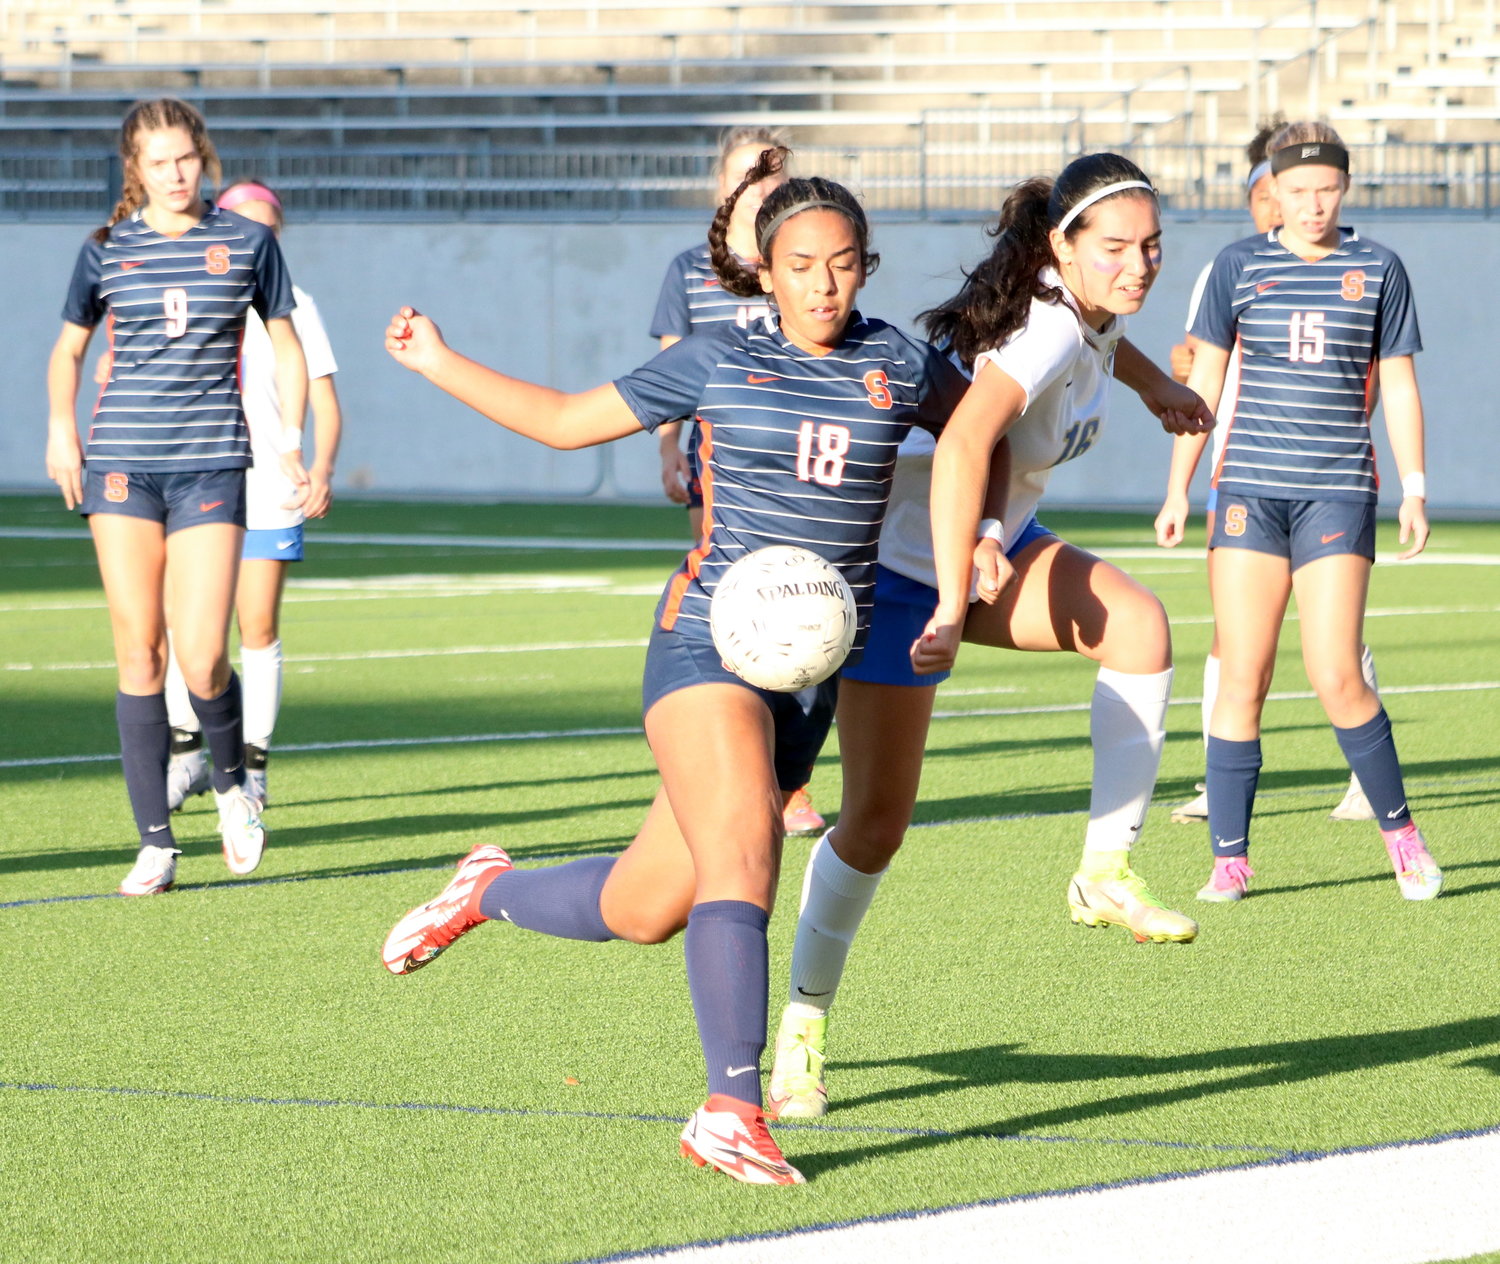 Rebecca Romero tries to hold up a ball while battling a defender during Thursday’s Class 6A bi-district round game between Seven Lakes and Fort Bend Elkins at Legacy Stadium.